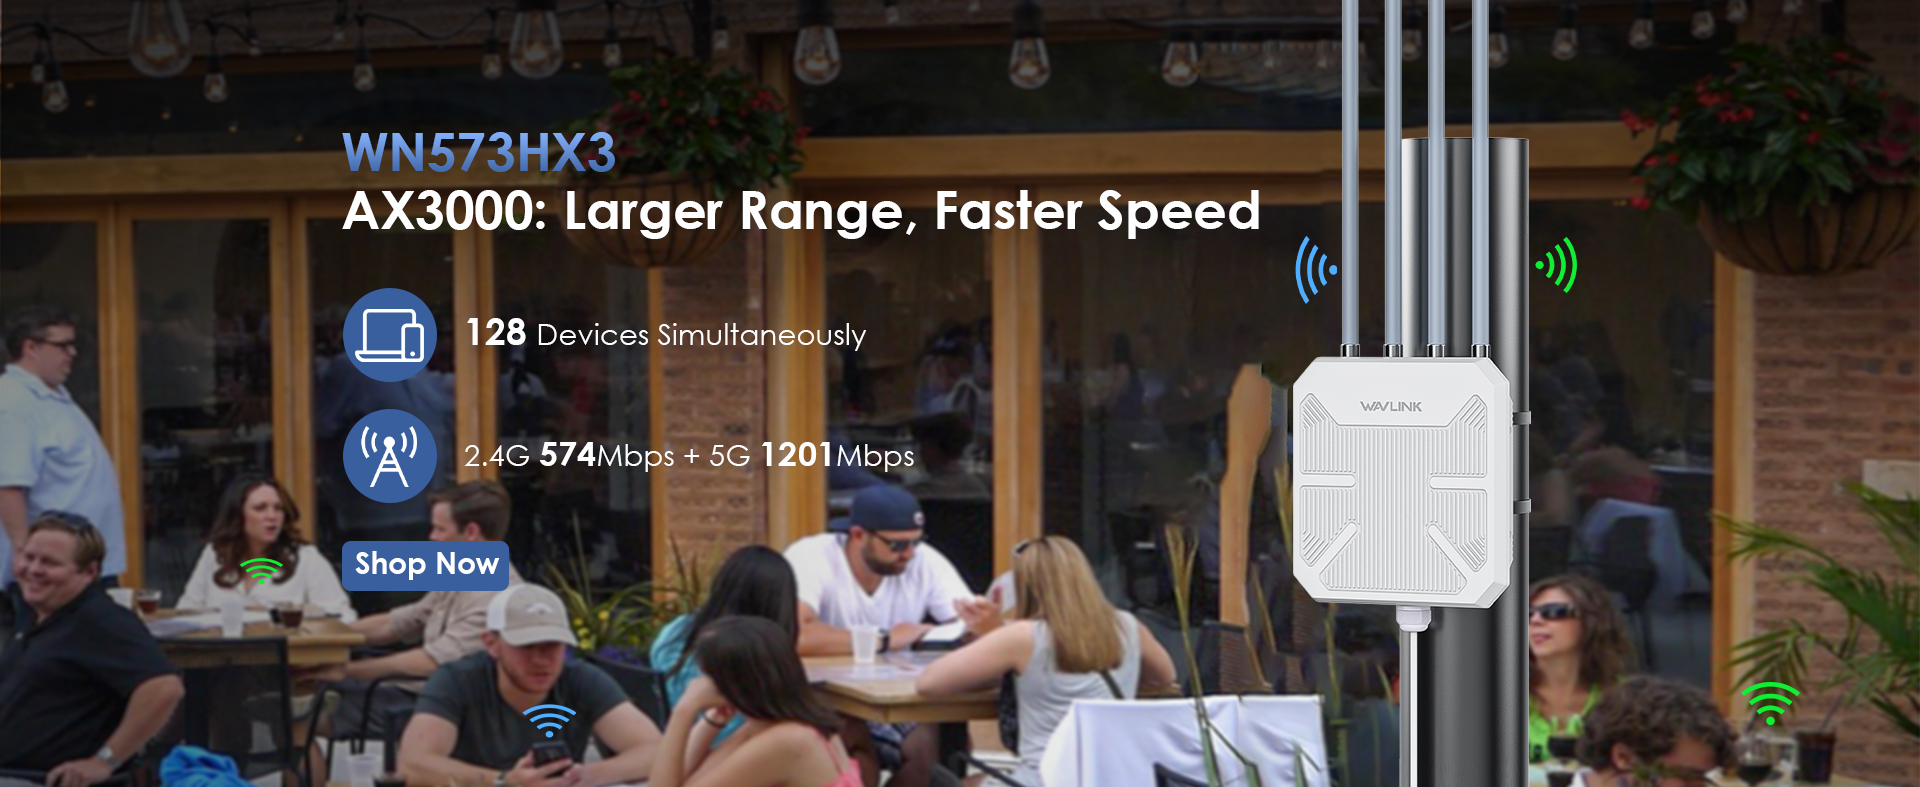 AX3000 Wi-Fi repeater for outdoor